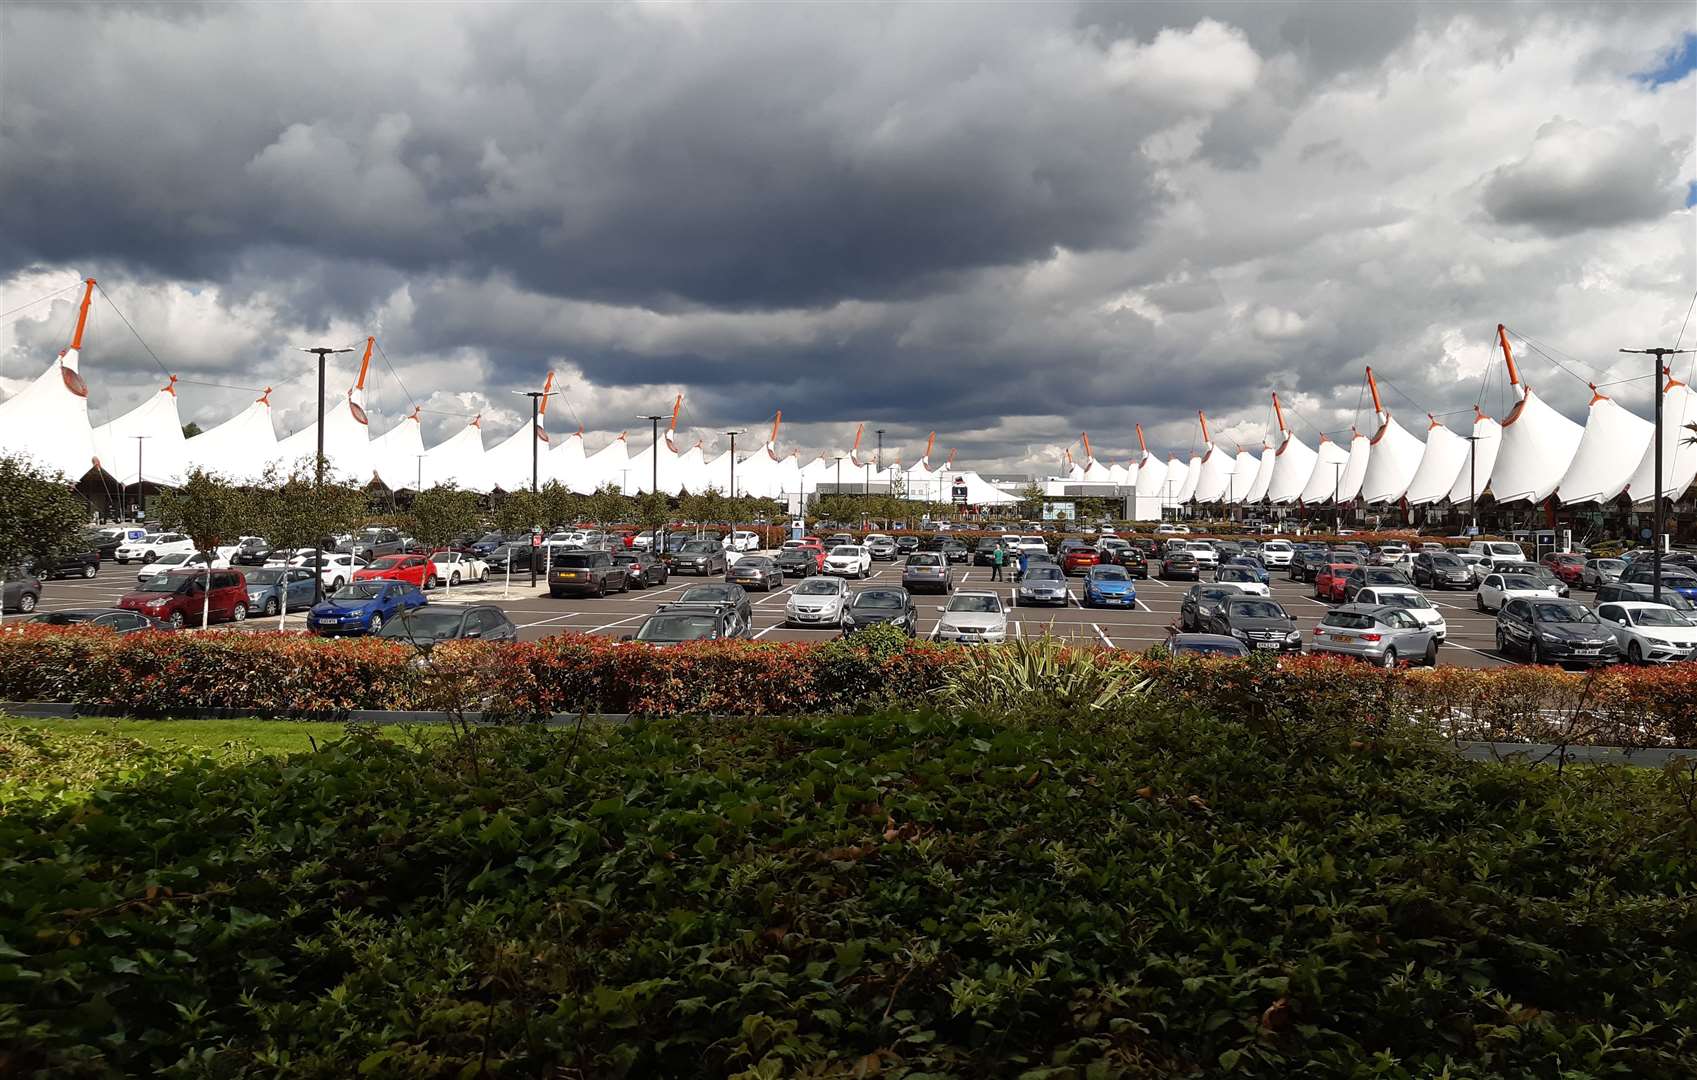 The Designer Outlet car park was busy this morning